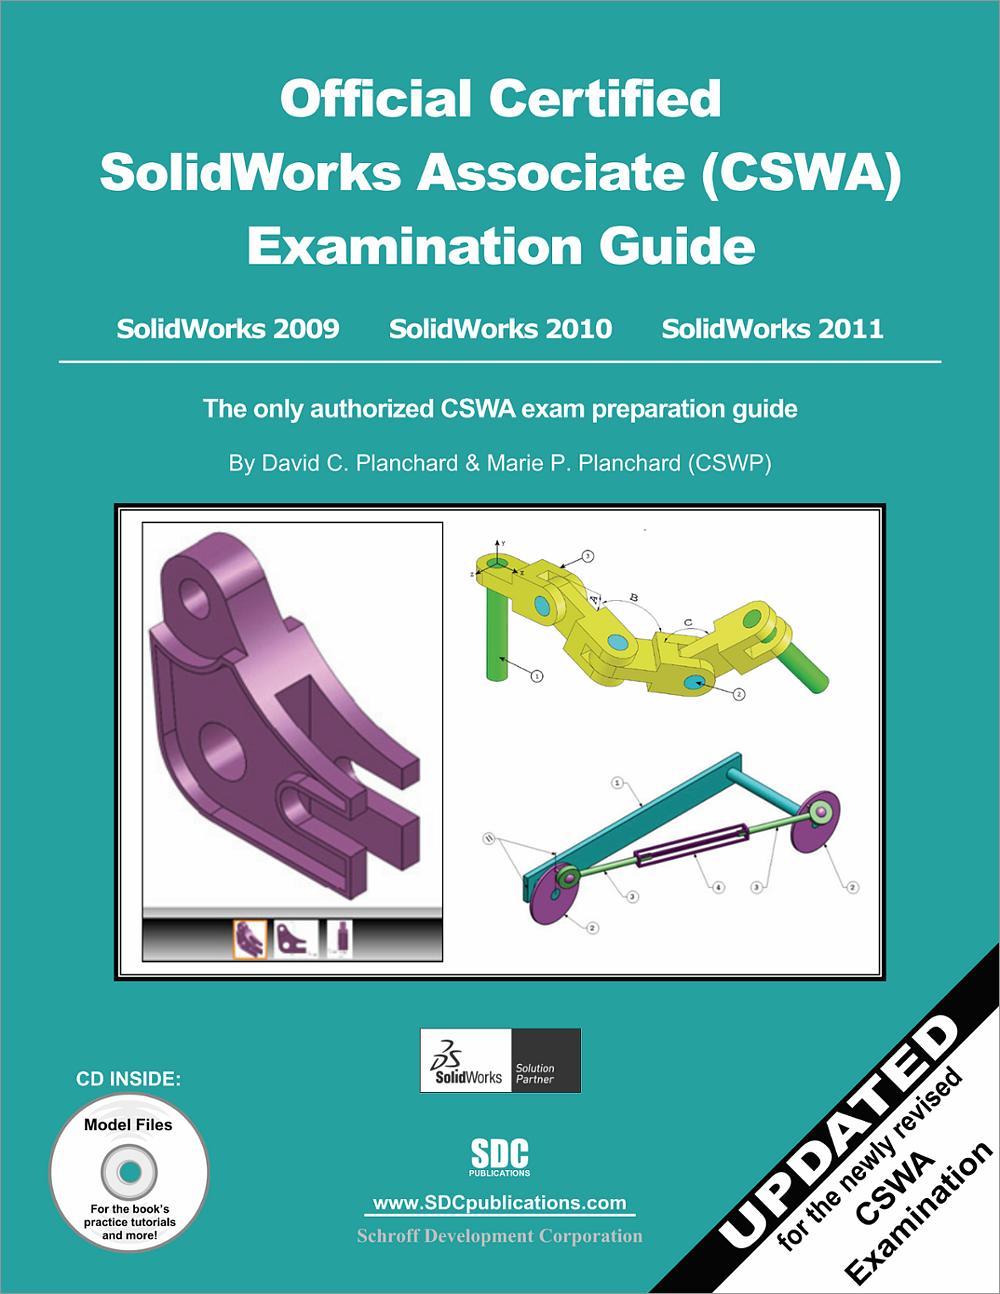 solidworks certification directory